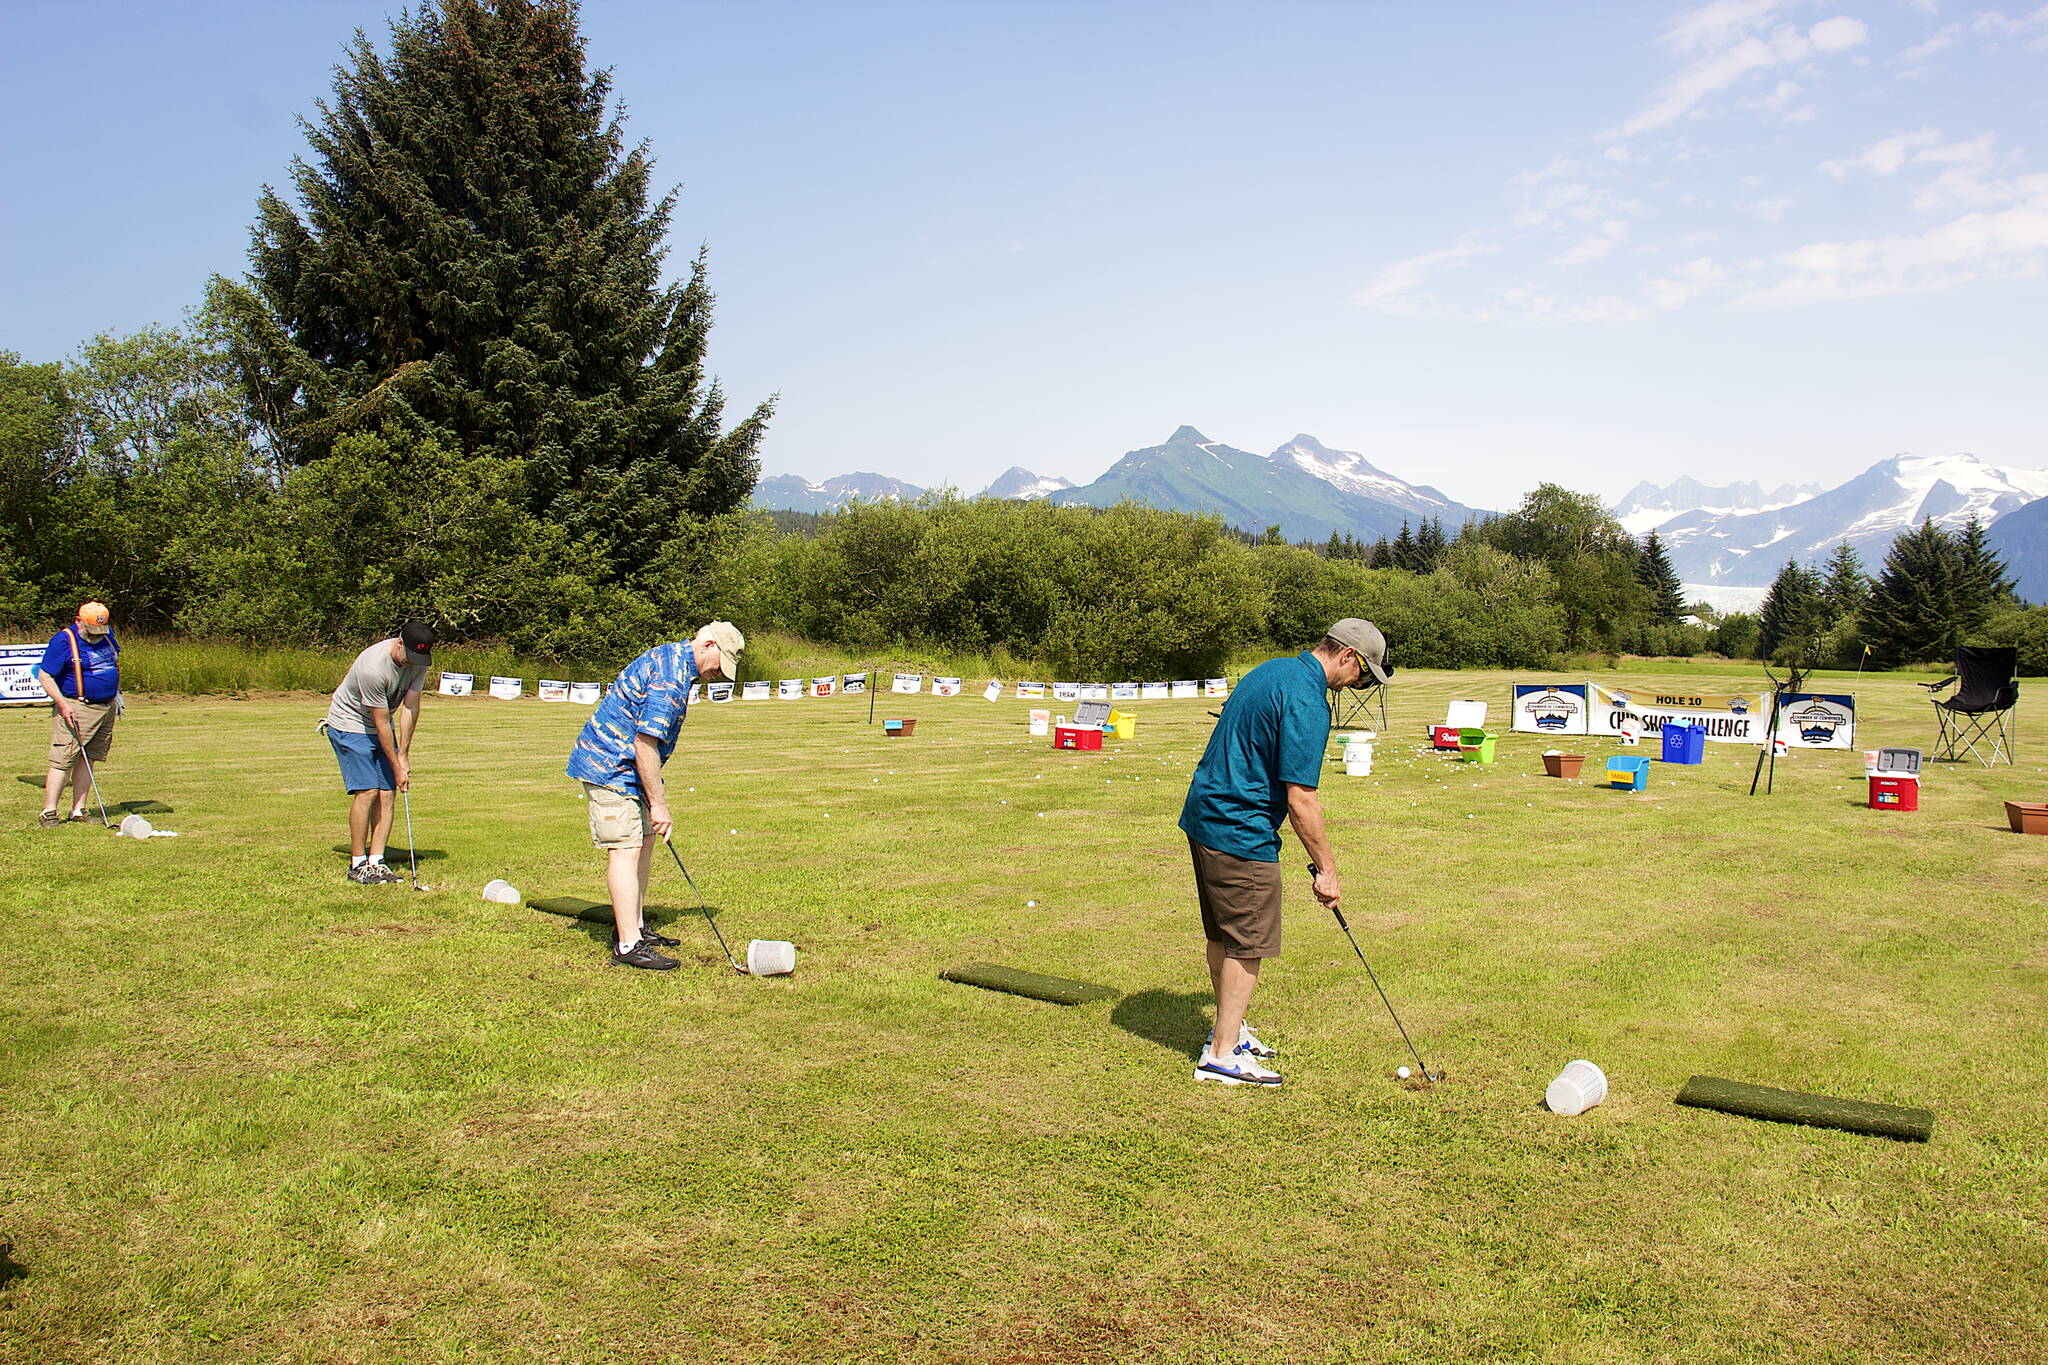 Golfers test their skills at the “chip shot challenge” during the Annual Greater Juneau Chamber of Commerce Golf Classic on Saturday at the Mendenhall Golf Course. (Mark Sabbatini / Juneau Empire)